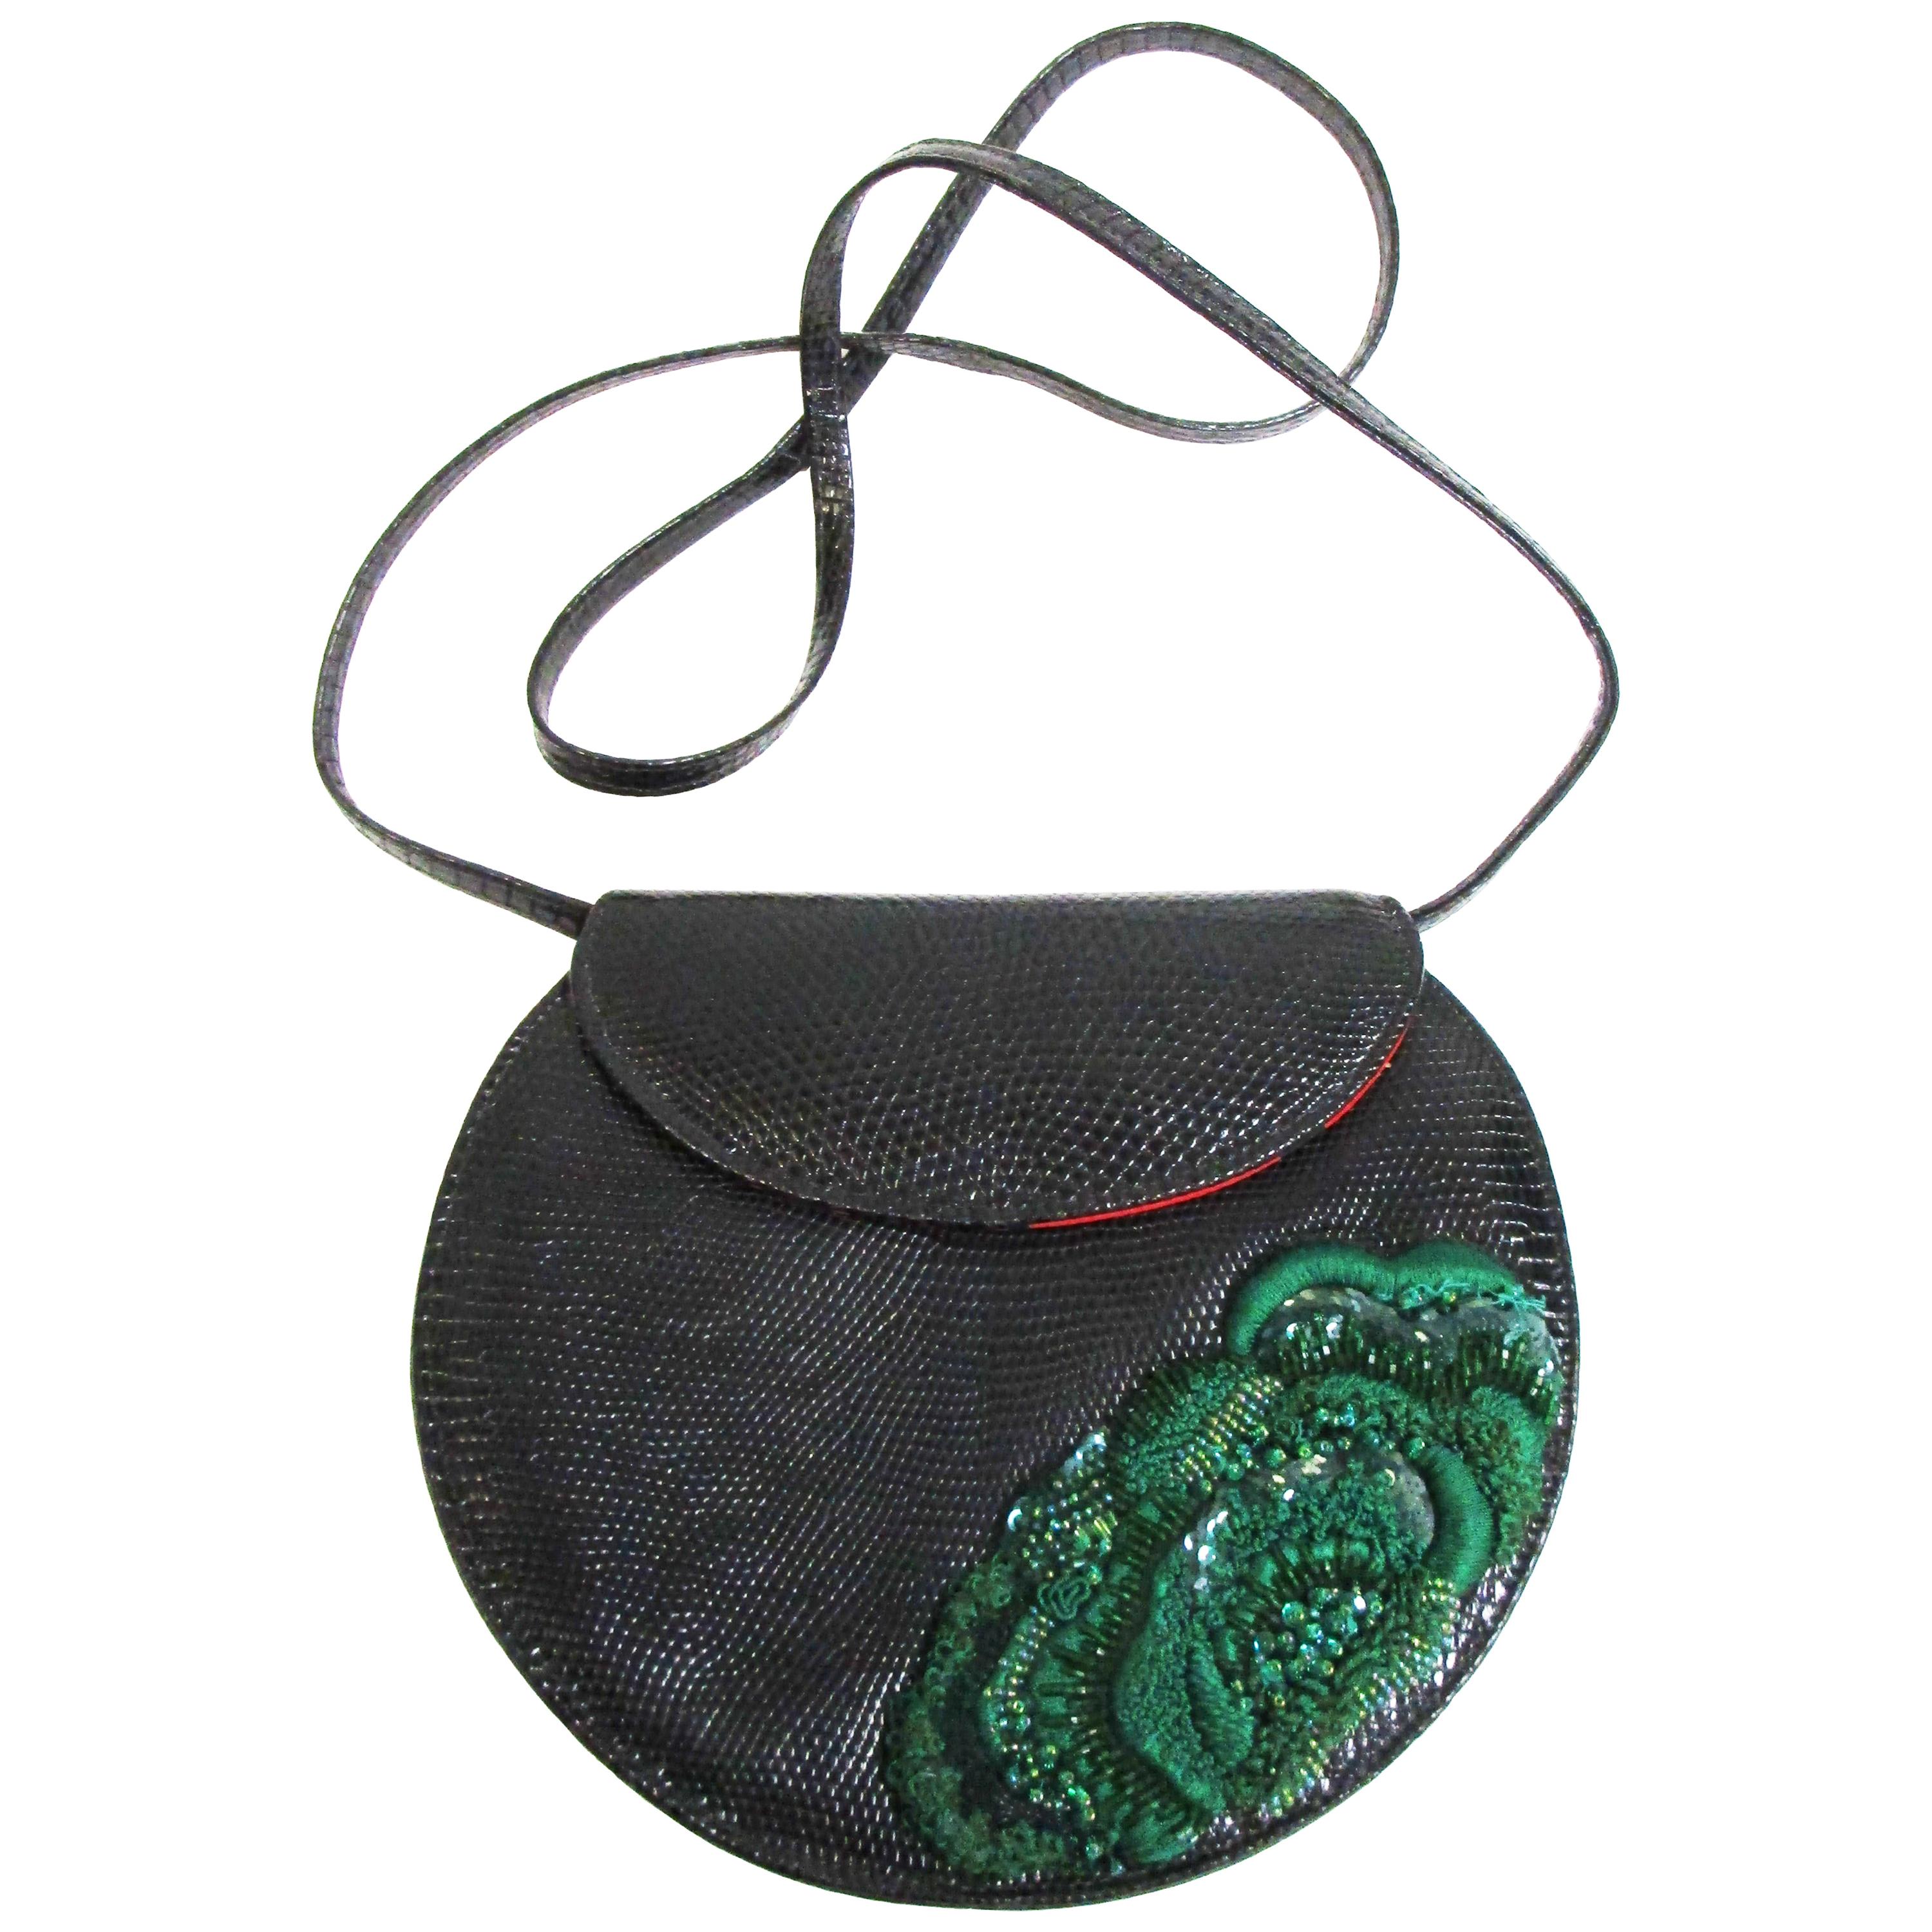 1990s Geoffrey Beene Black Lizard Purse with Beaded Emerald Green Embroidery  For Sale